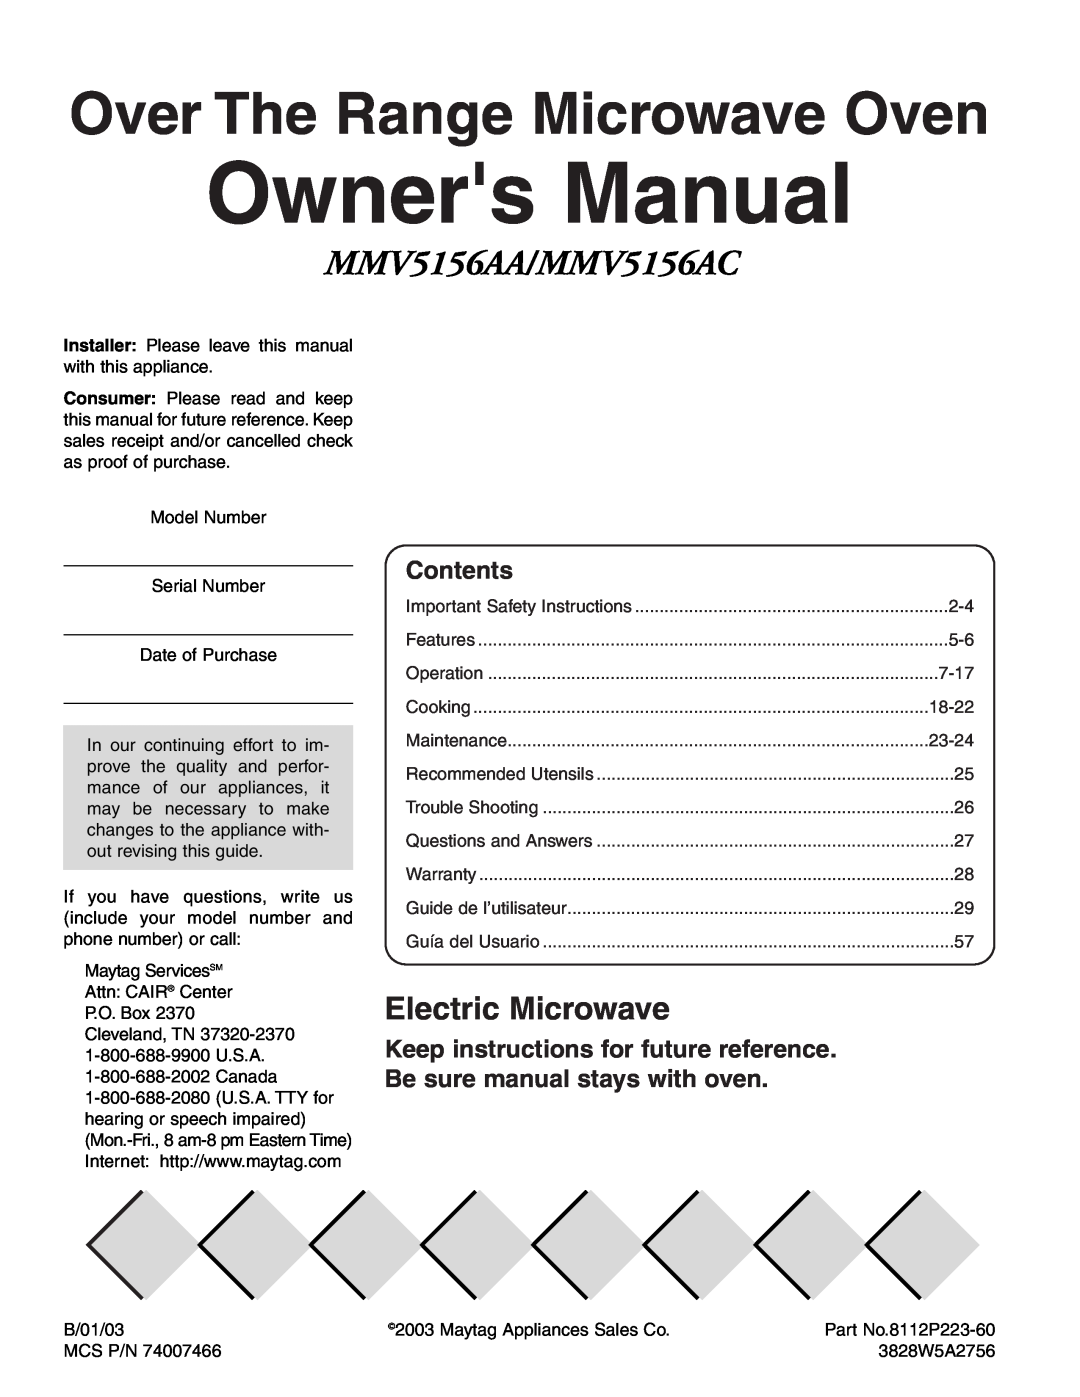 Maytag owner manual Owners Manual, Over The Range Microwave Oven, MMV5156AA/MMV5156AC, Electric Microwave, Contents 